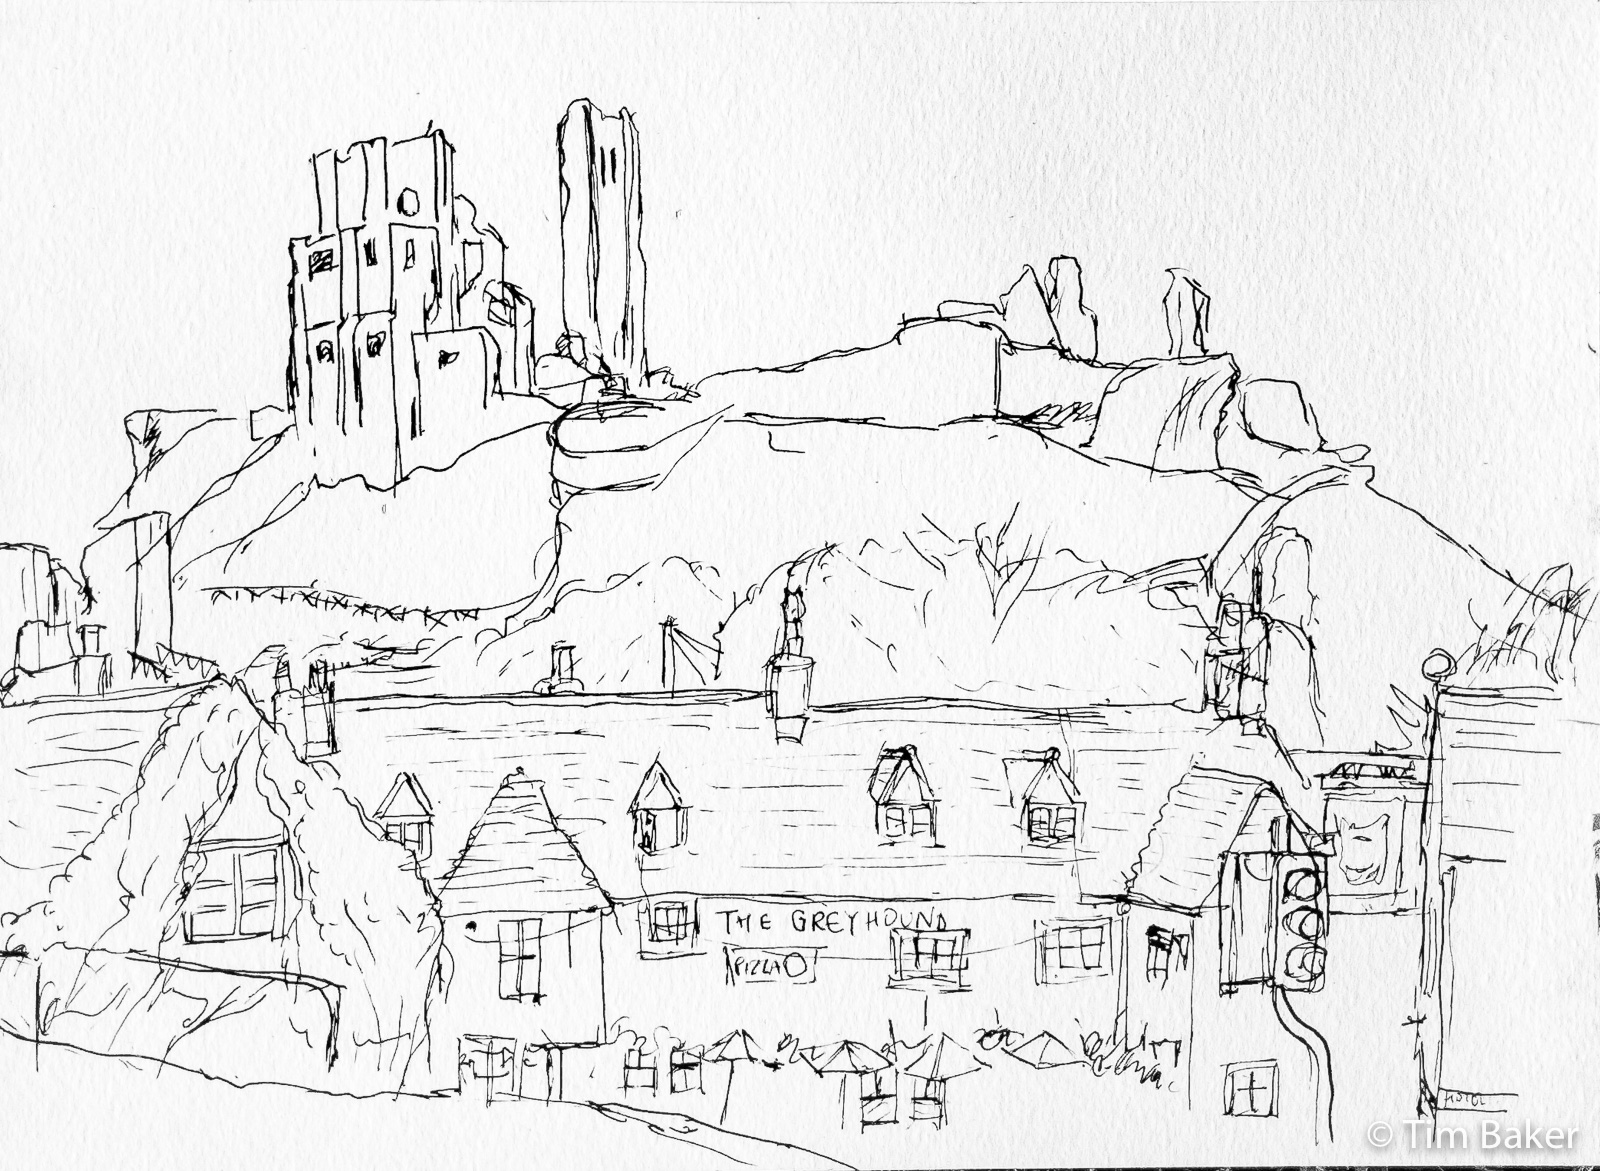 Corfe Castle and Greyhound Inn, in progress drawing, Technical Pen, A4 Faber Castell Mixed Media Sketchbook